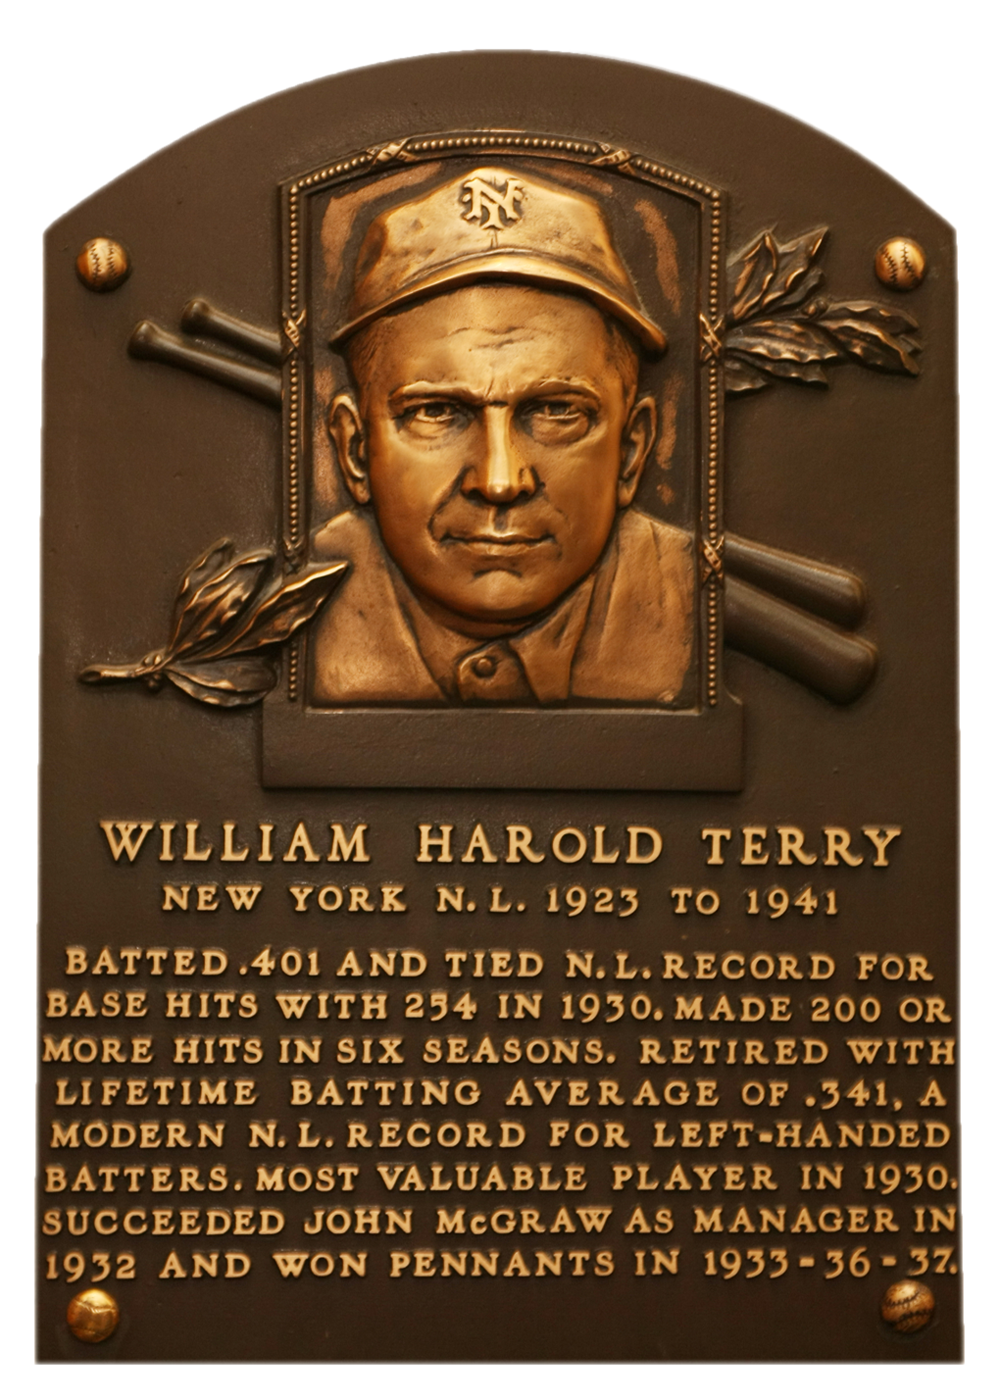 Bill Terry Hall of Fame plaque